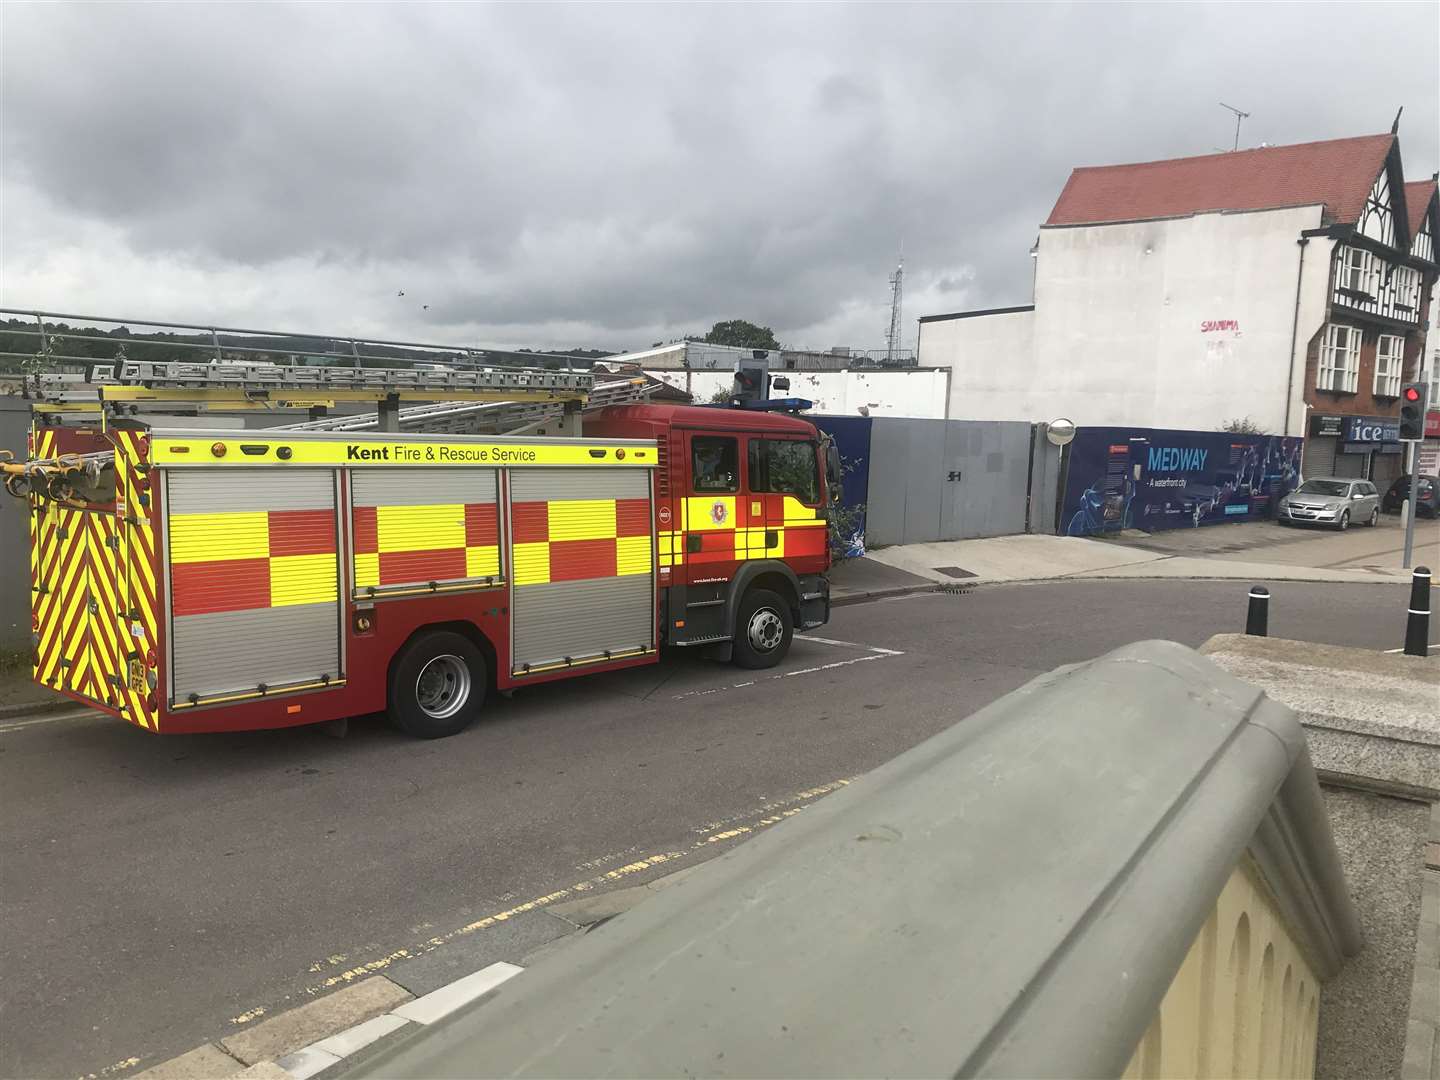 Police, firefighters and the coastguard were called to the scene near Rochester Bridge